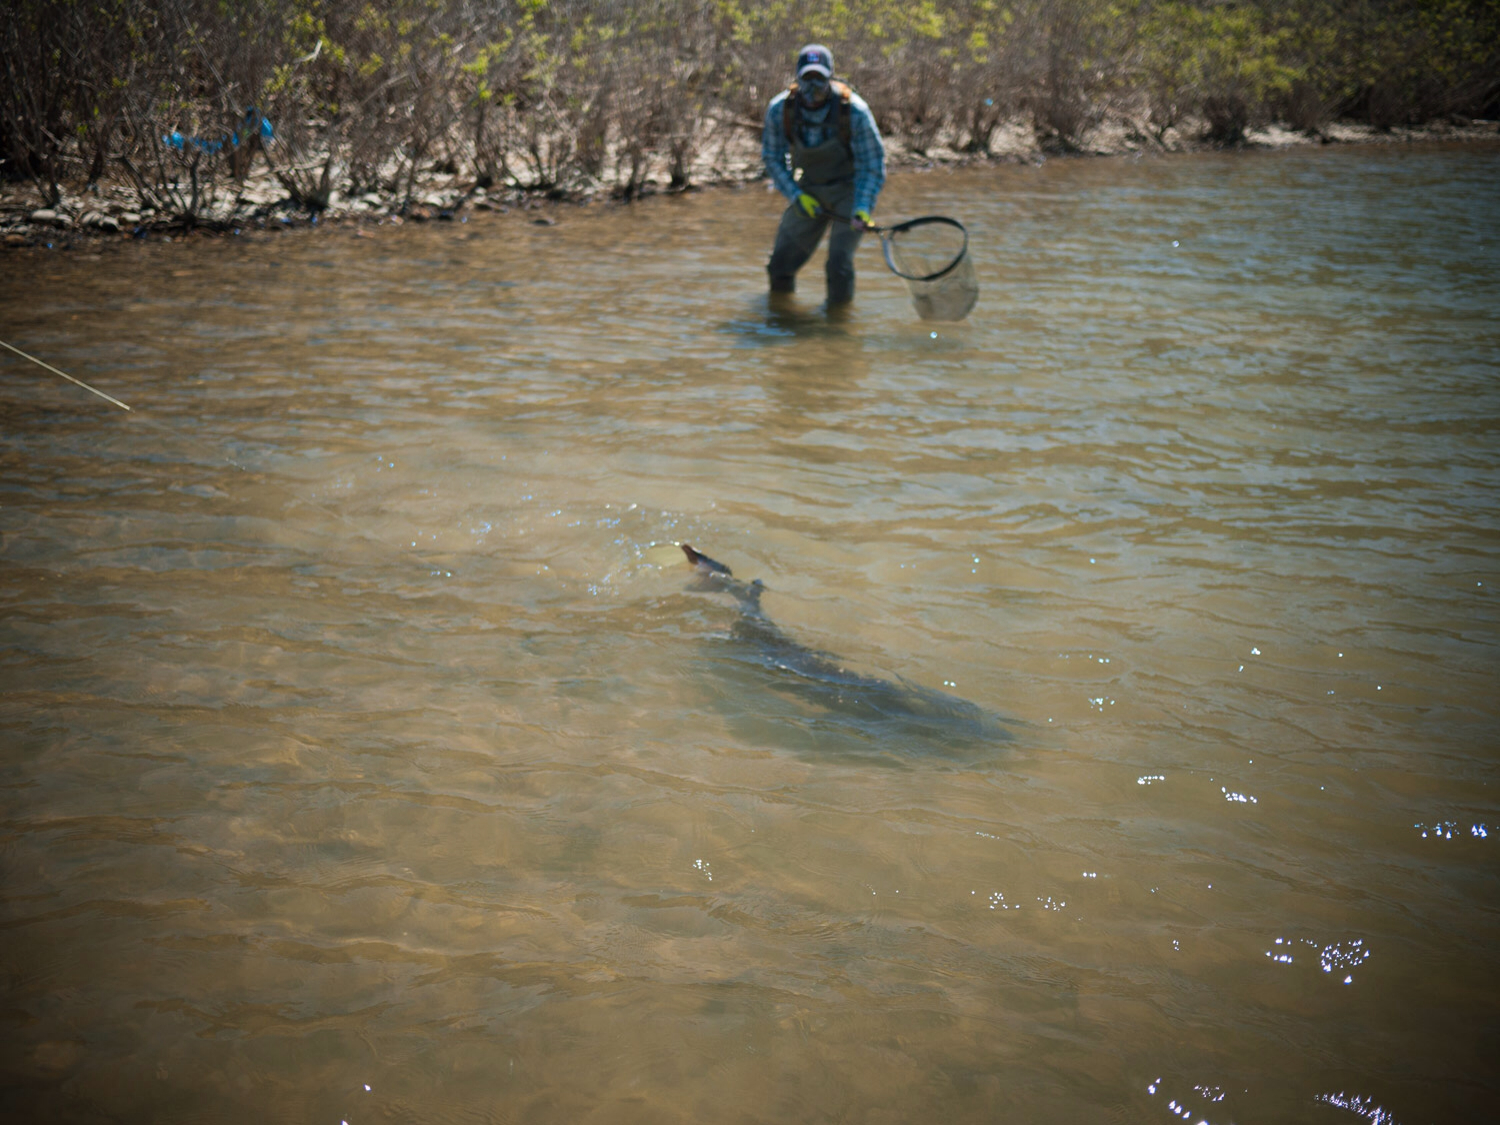 Photos and Story of An Amazing Catch: Sturgeon on the Fly - Orvis News